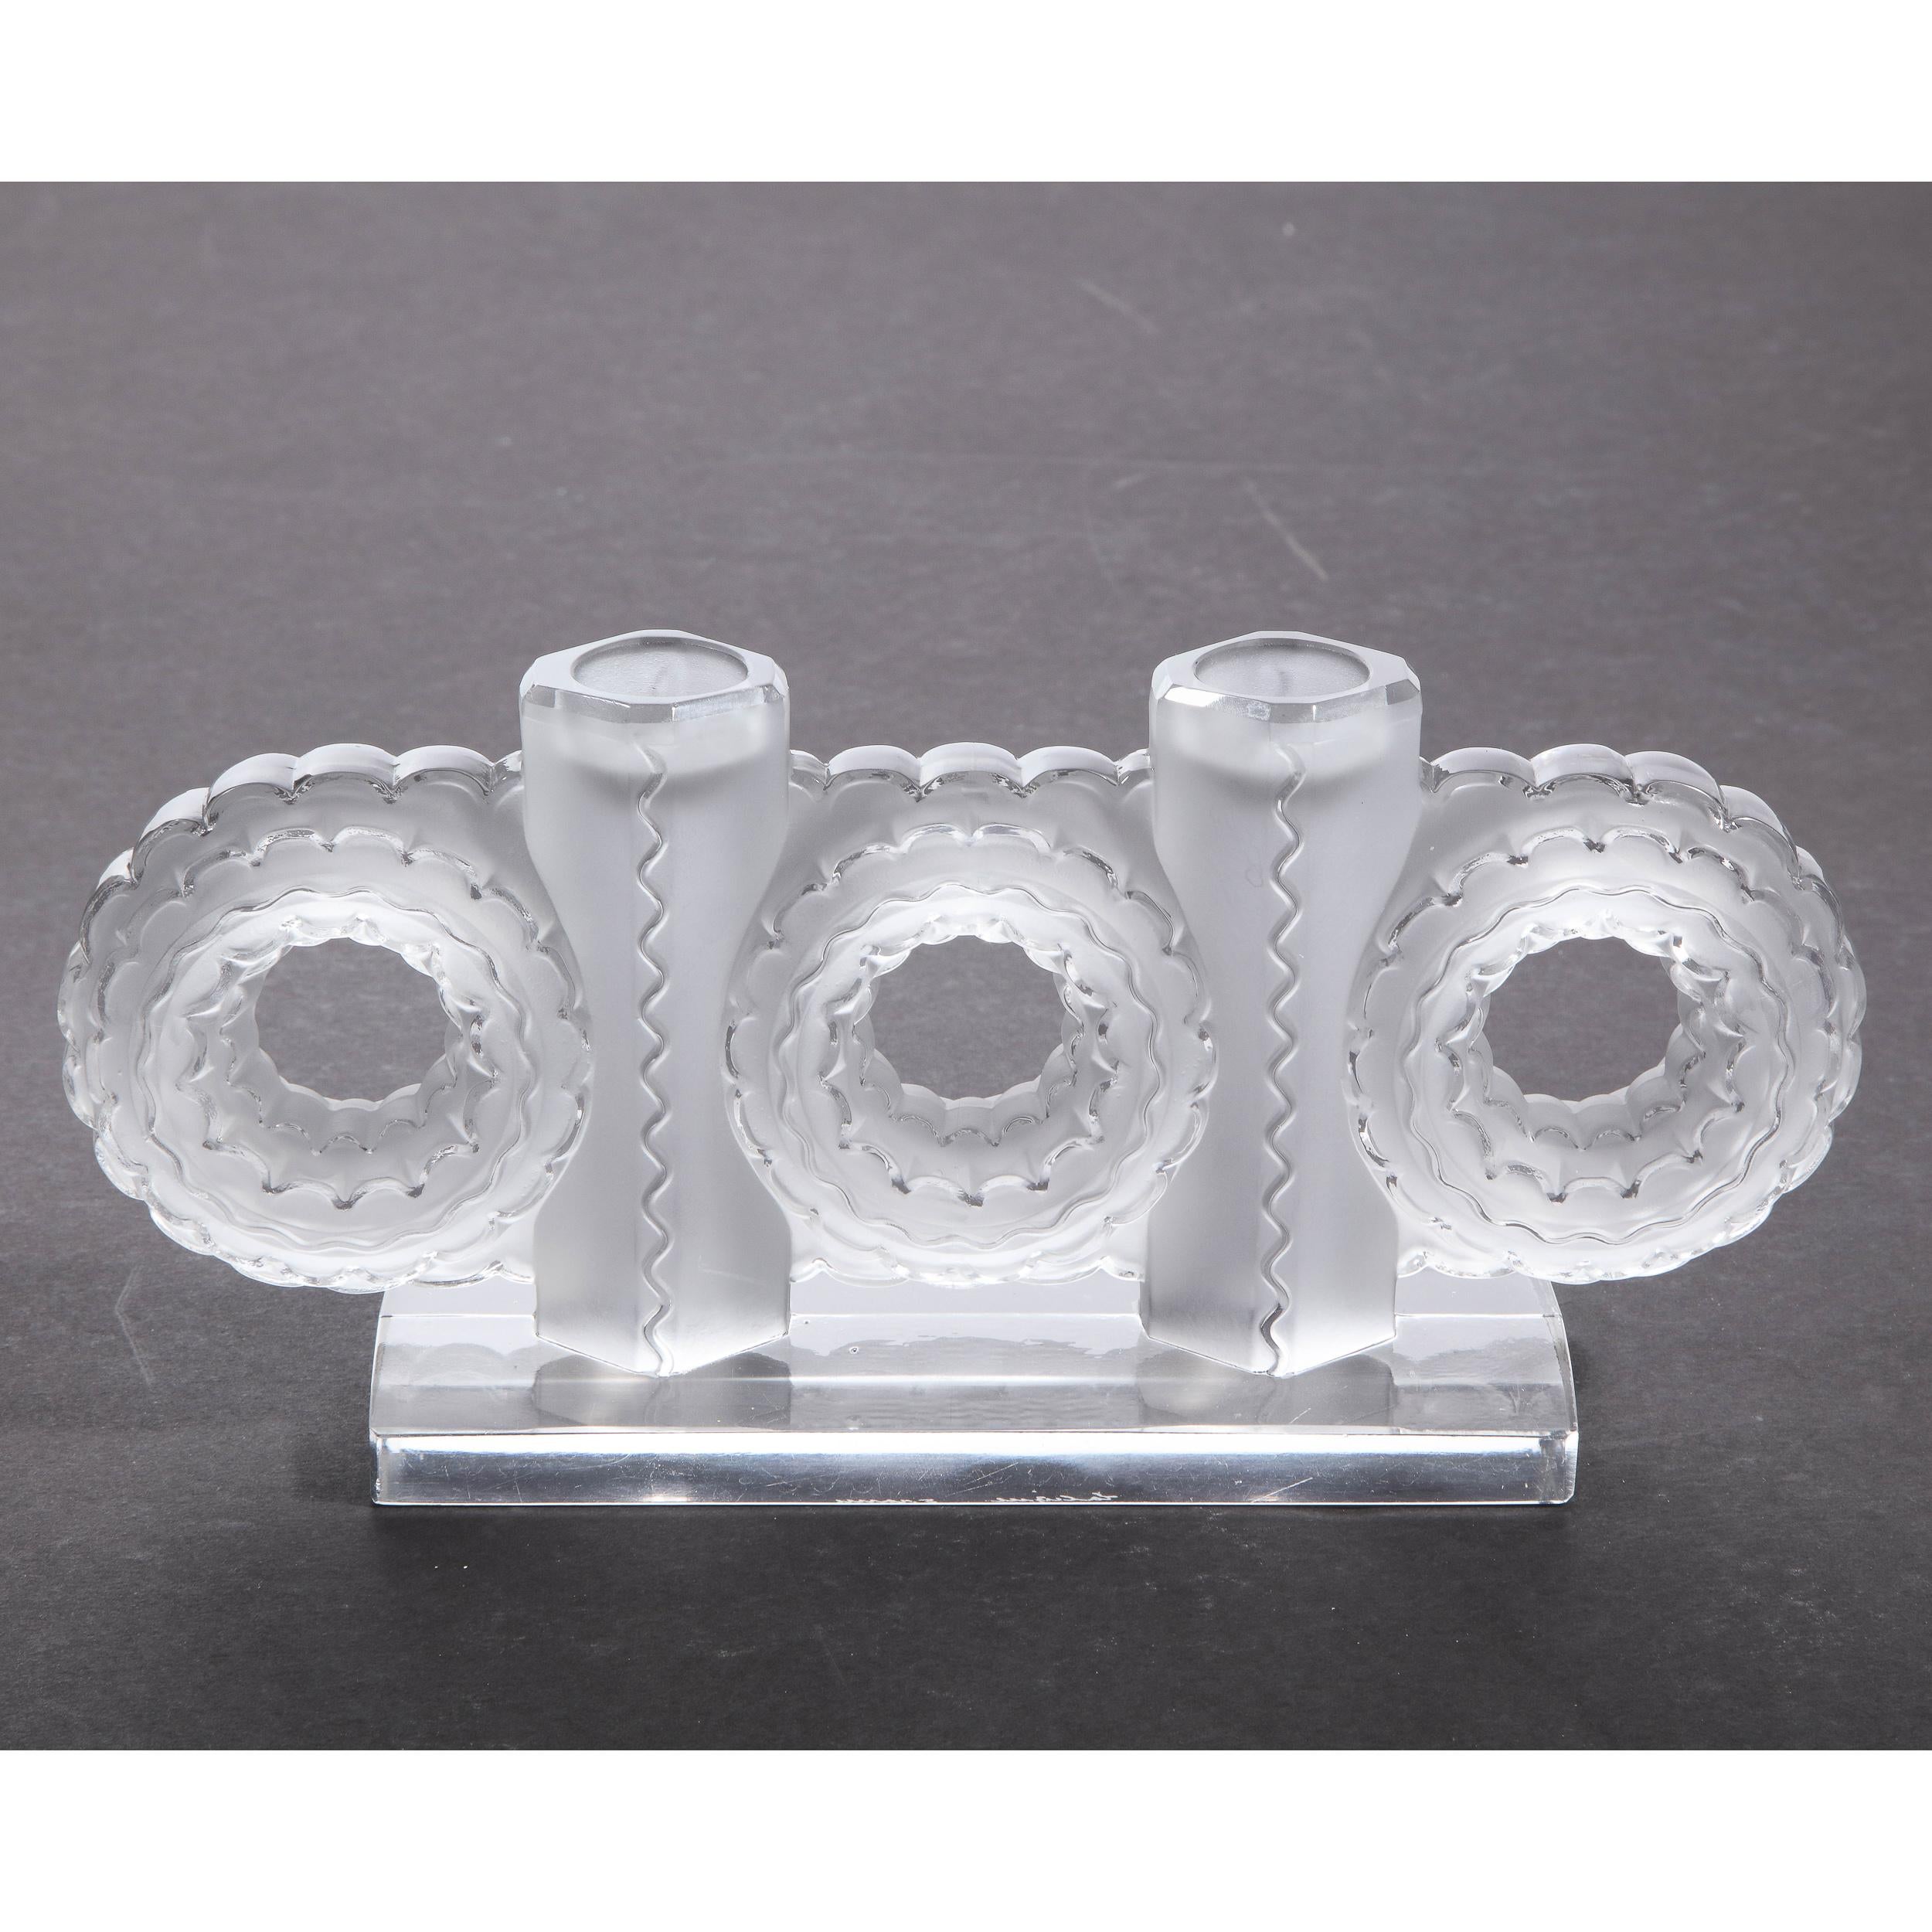 Modernist Frosted & Translucent Crystal Candle Holder by Lalique 4